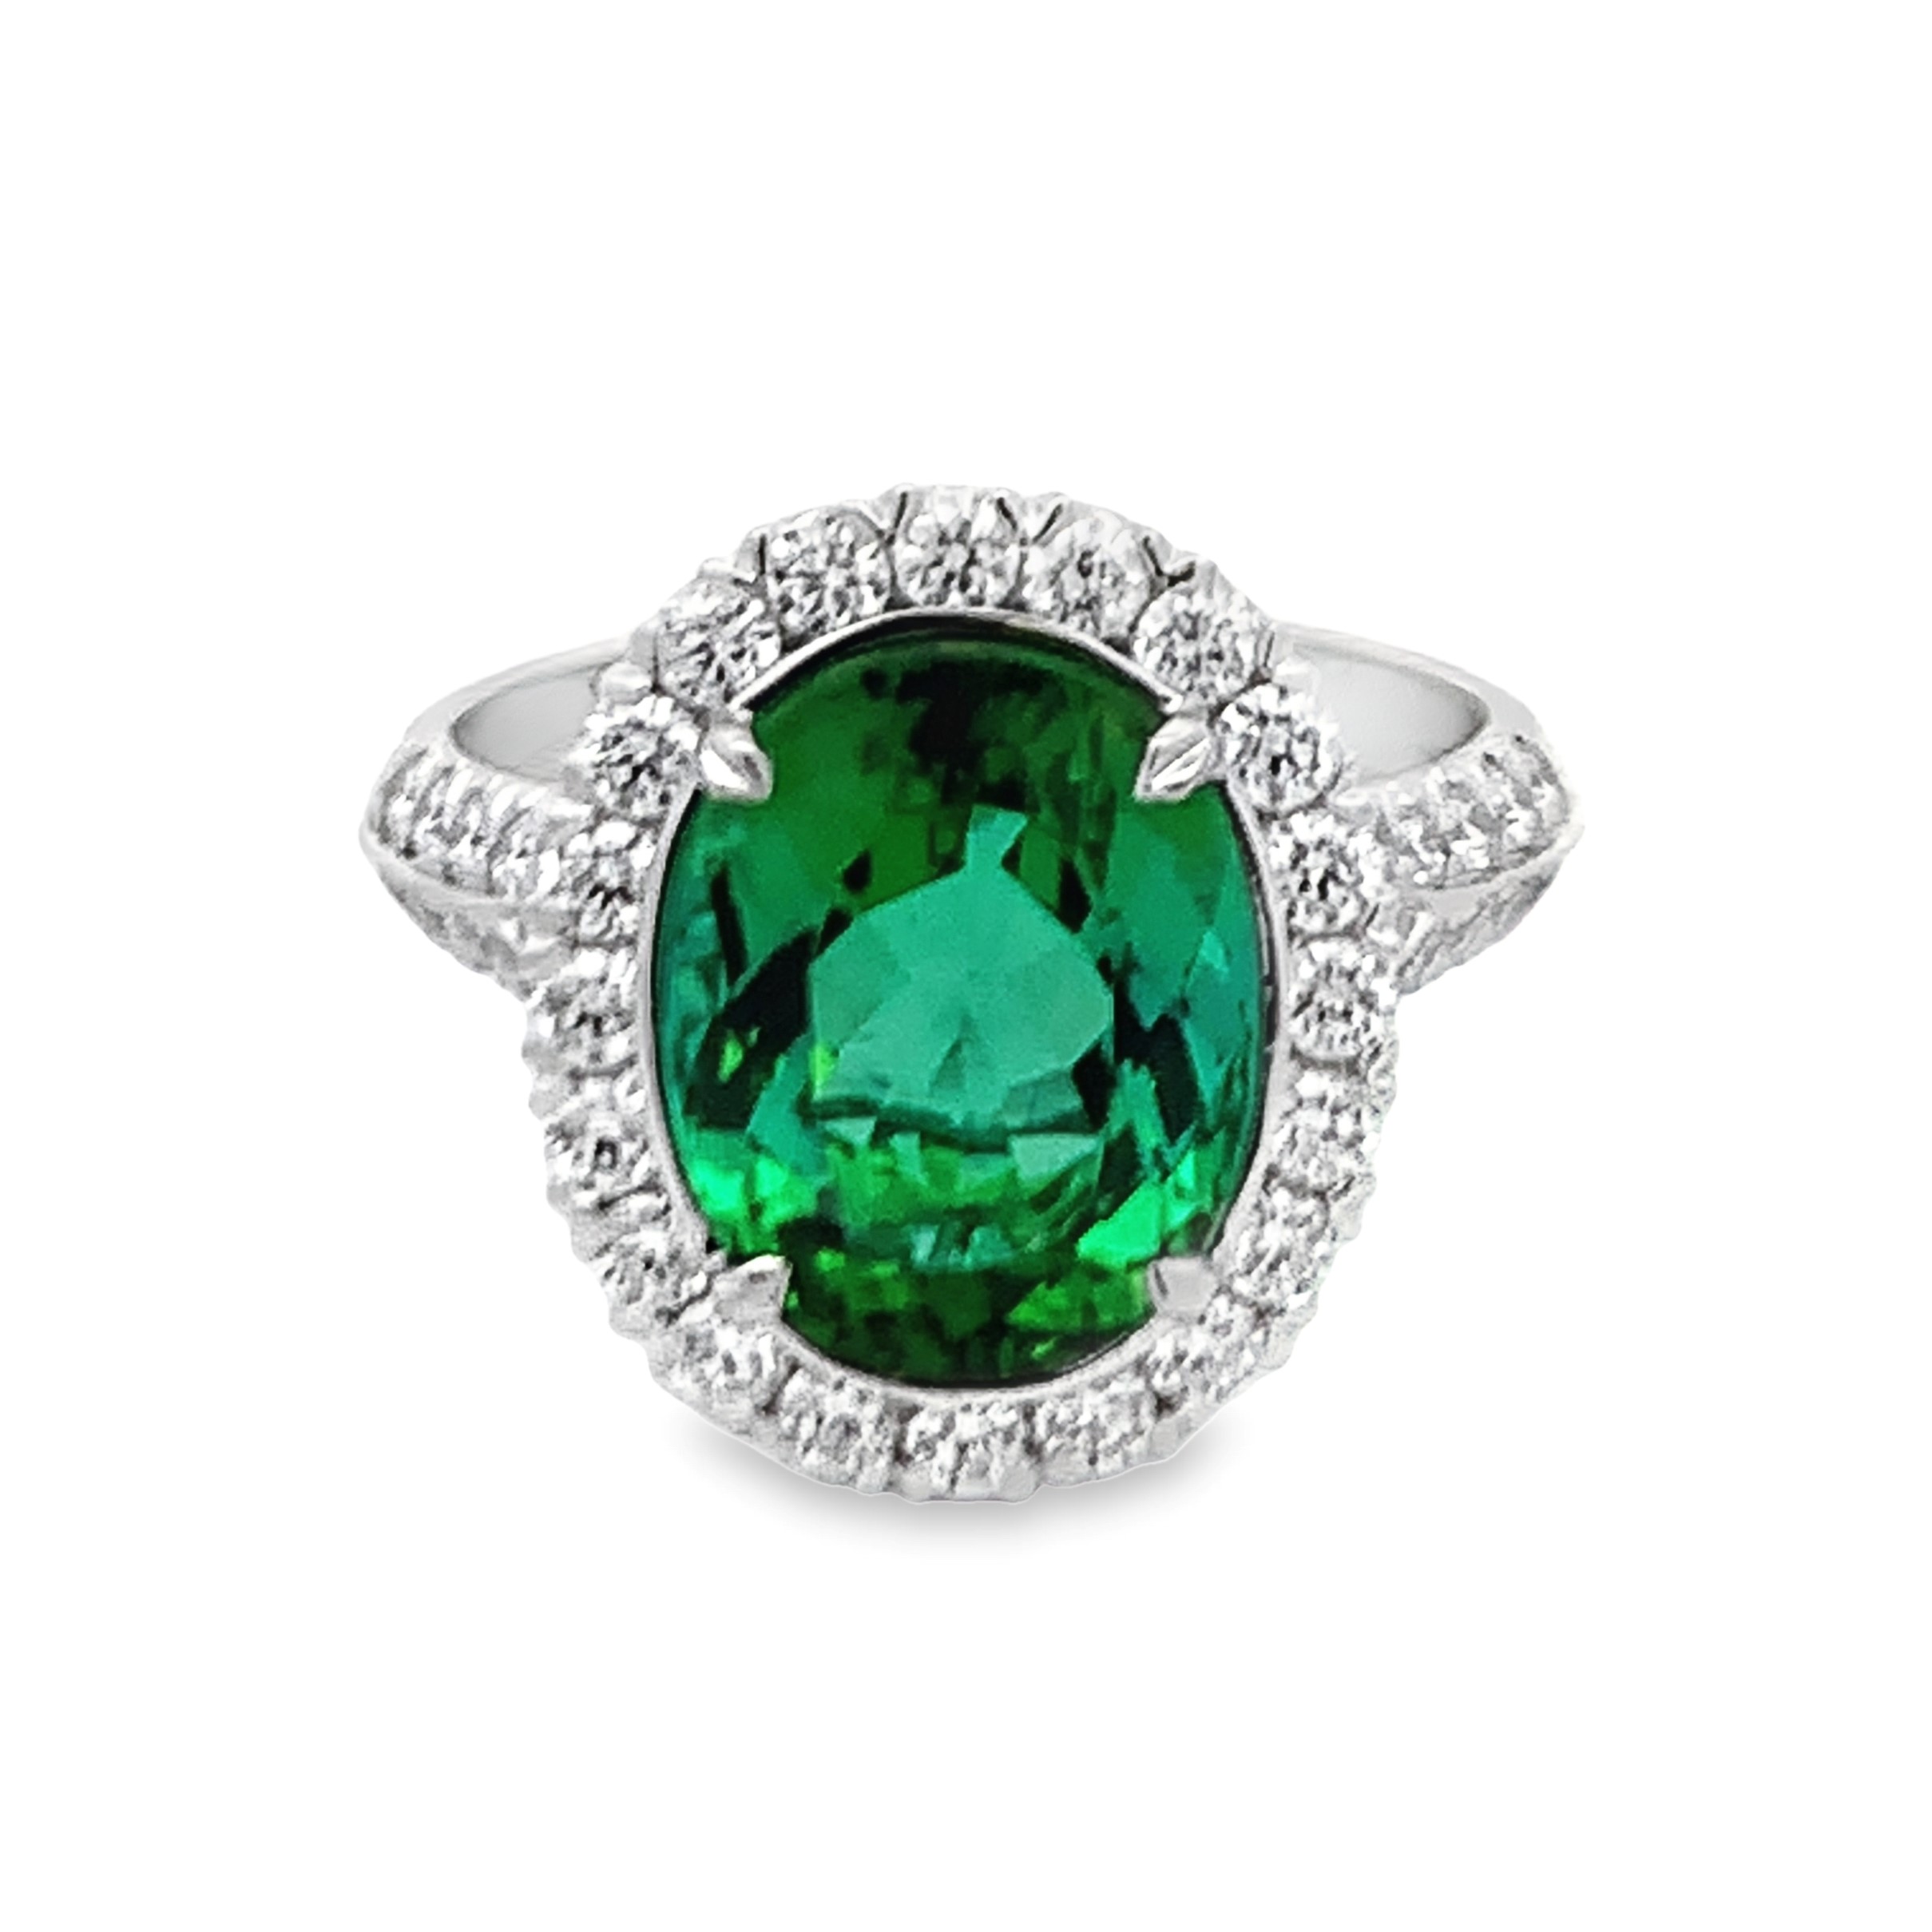 Christopher Designs 18K White Gold Ring with 1 Natural Oval Cut Green Tourmaline 4.22 TCW & 48 Round Diamonds 0.81 TCW G SI2